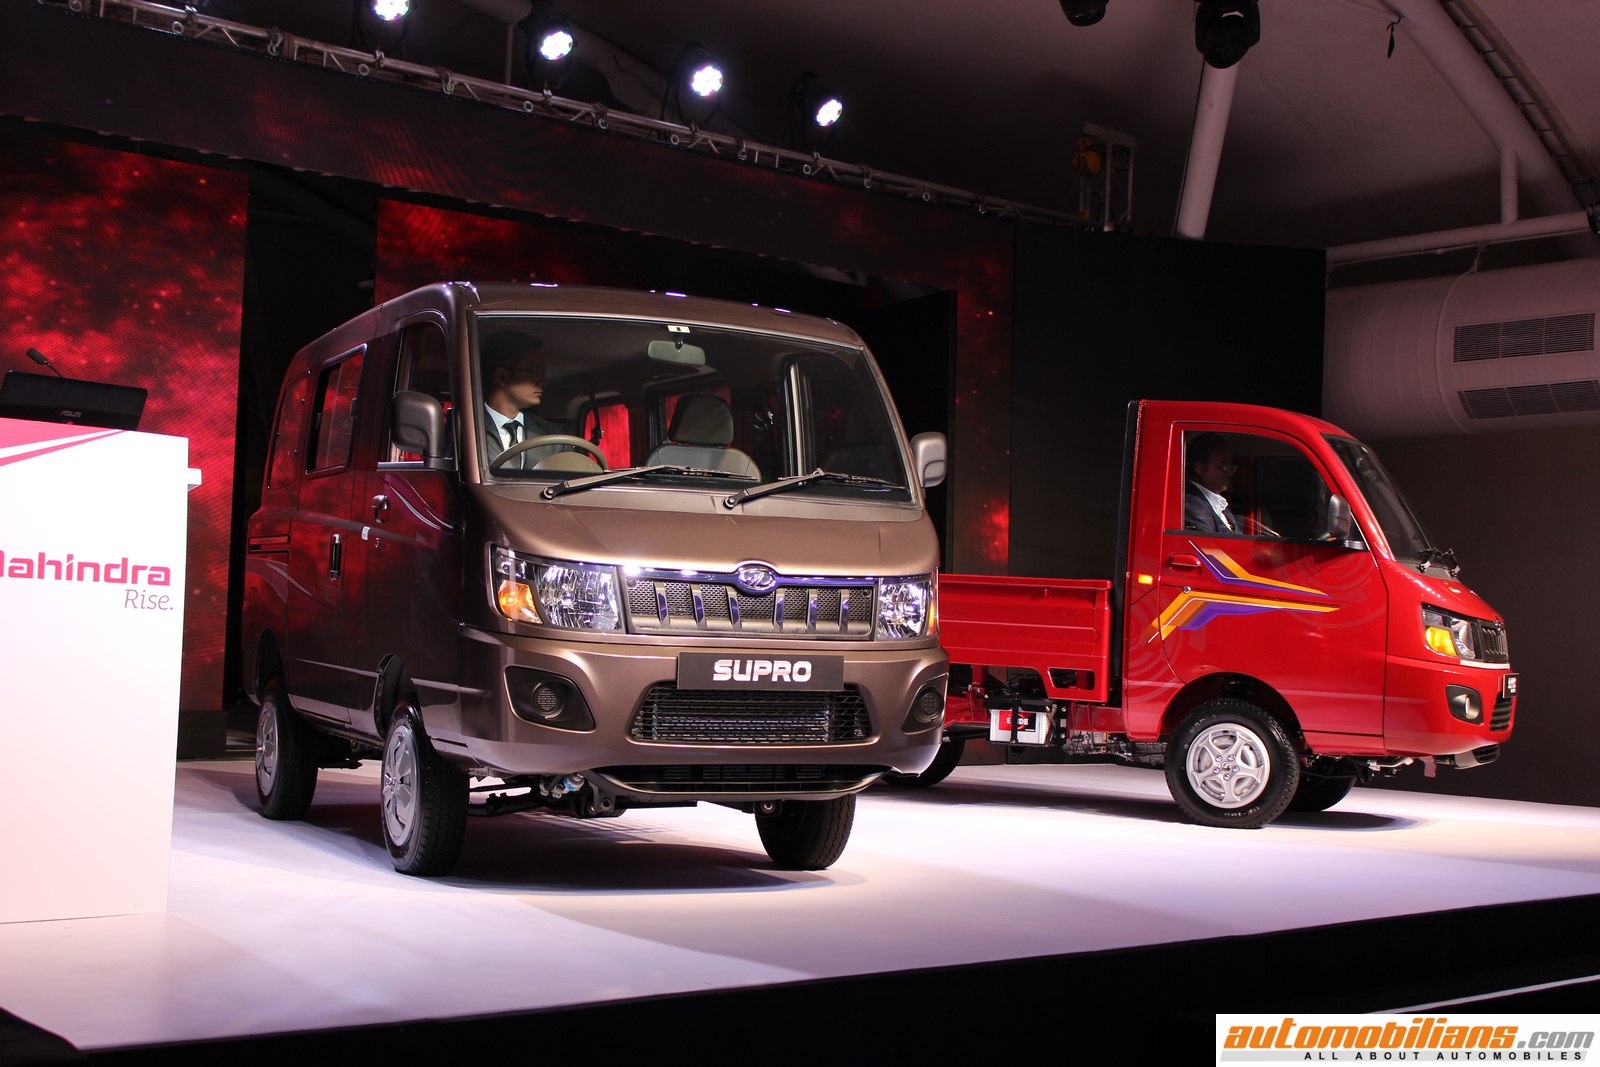 Mahindra Supro Van & Supro Maxitruck Launched In India At Rs. 4.38 Lakhs & Rs. 4.25 Lakhs Respectively (BSIII, Ex-Showroom, Thane)